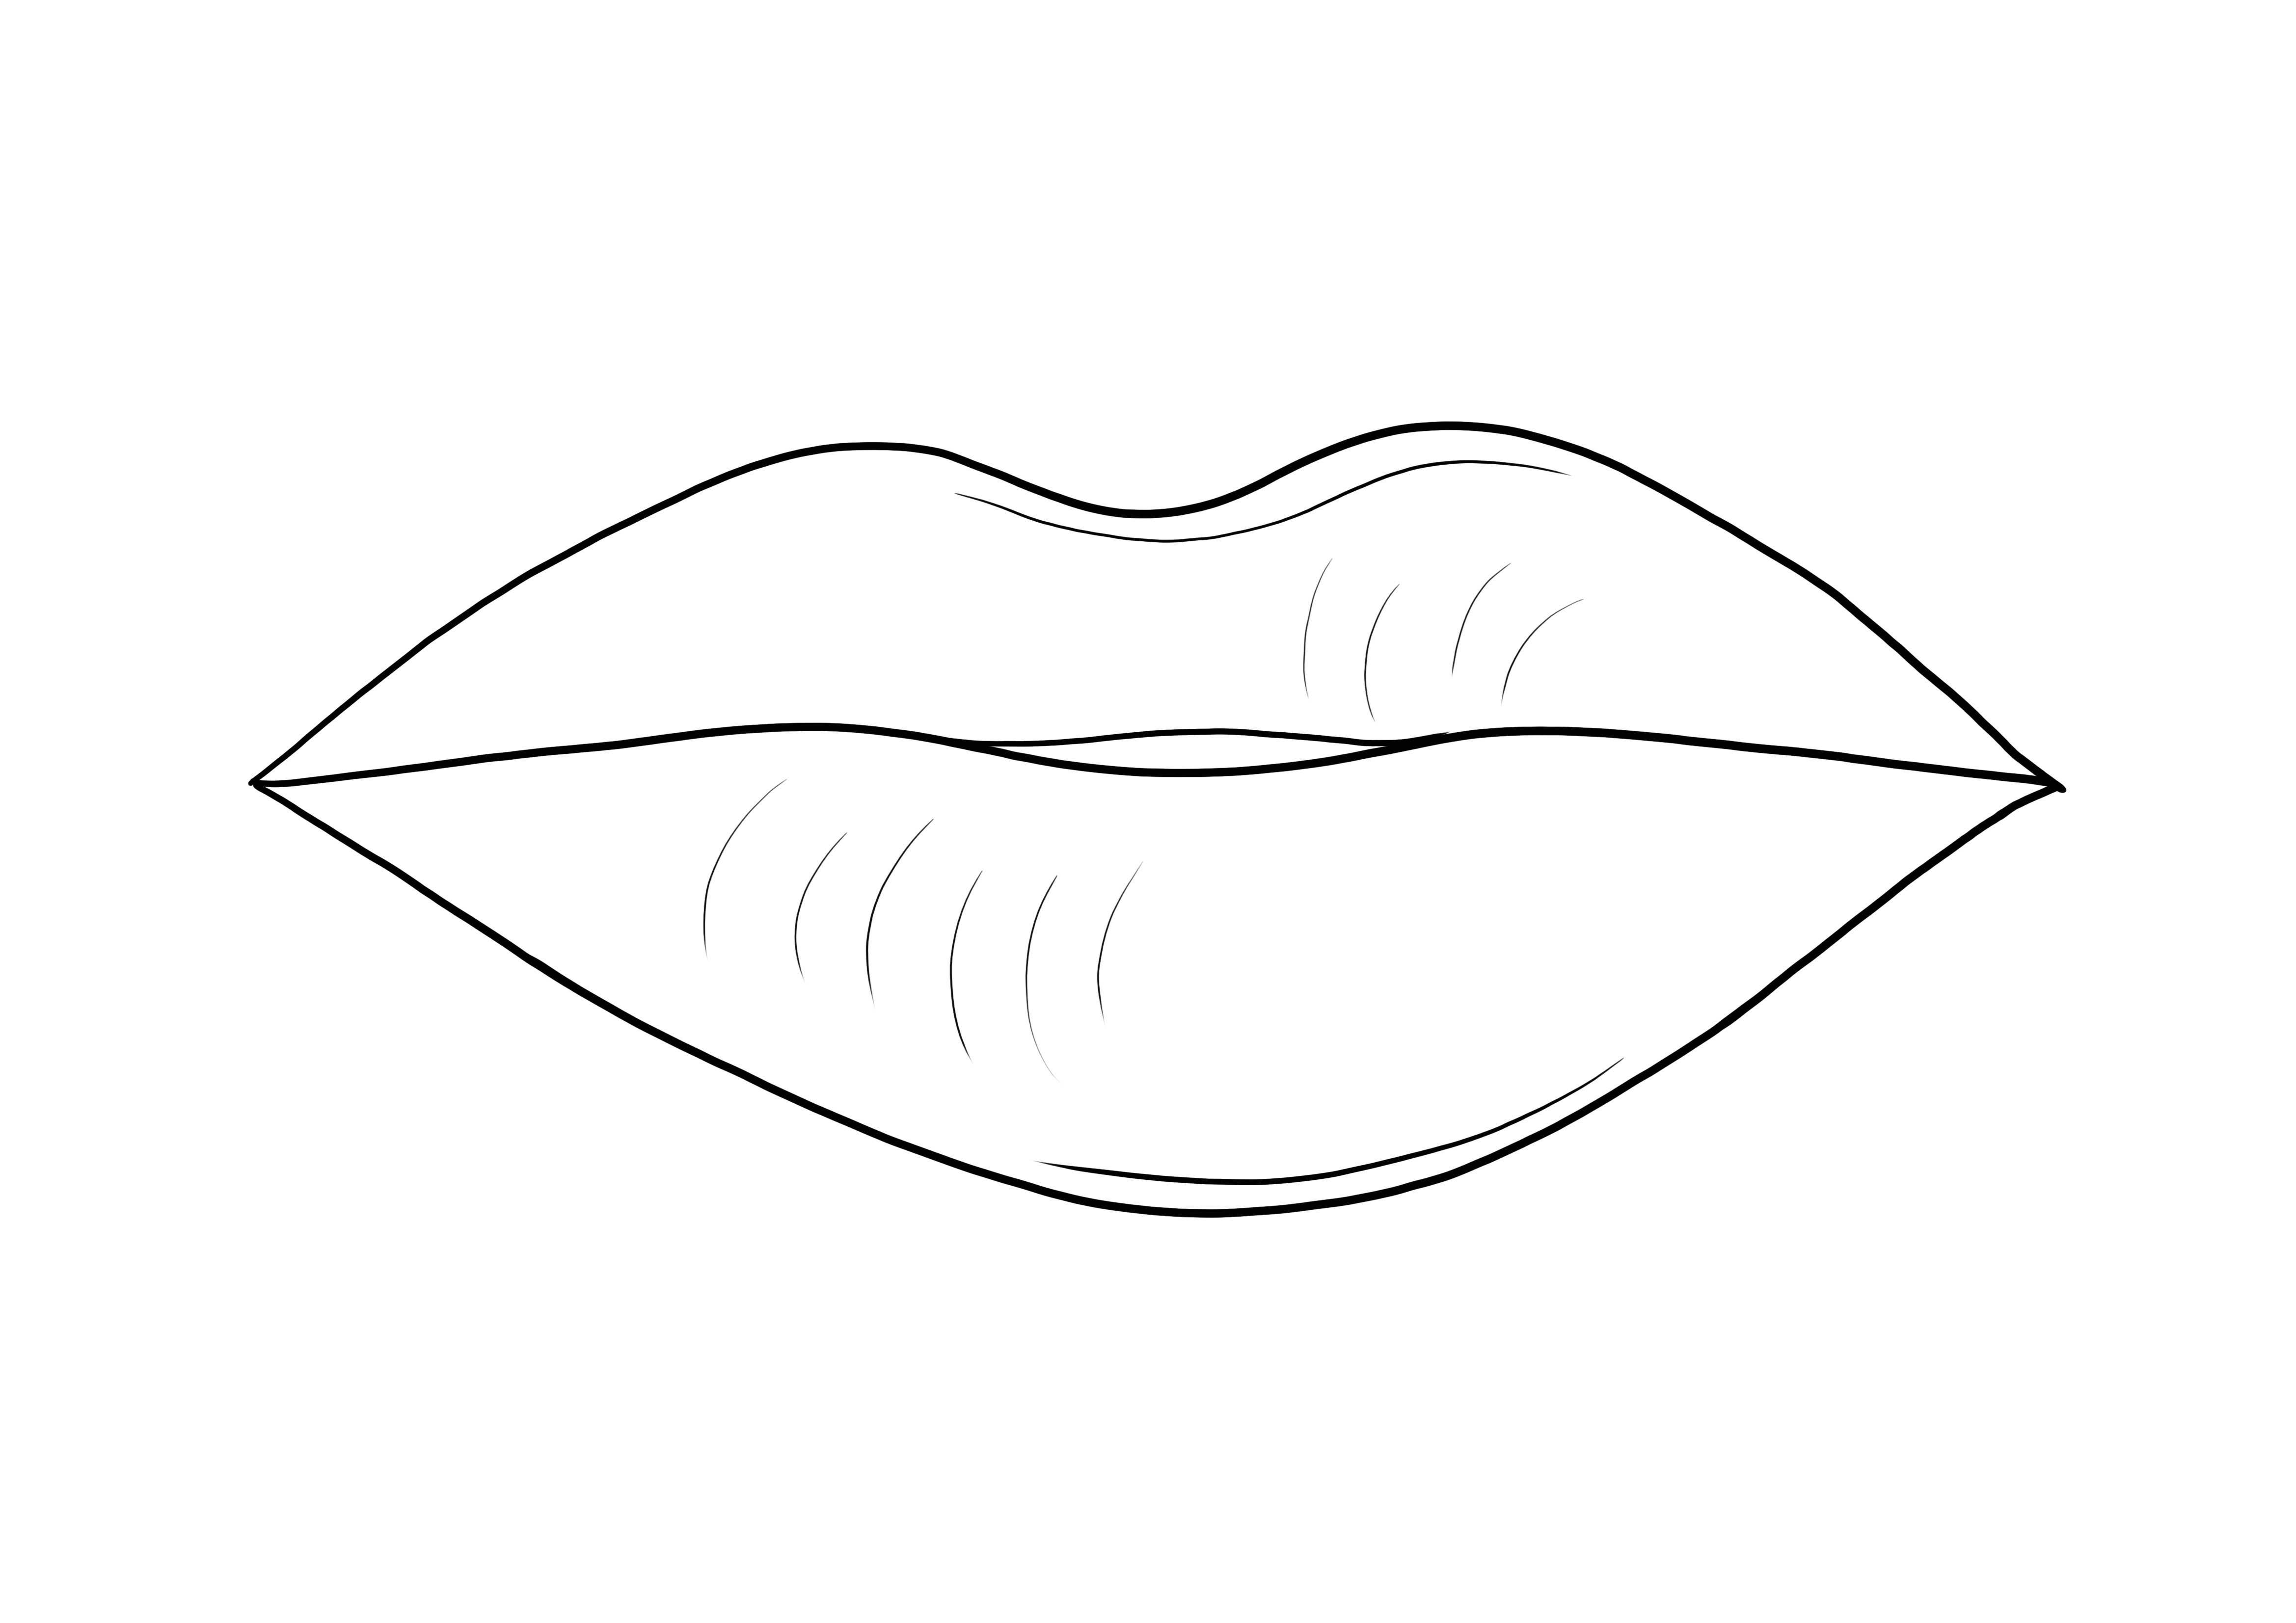 The free printable coloring sheet of Lips as a part of the human body to color